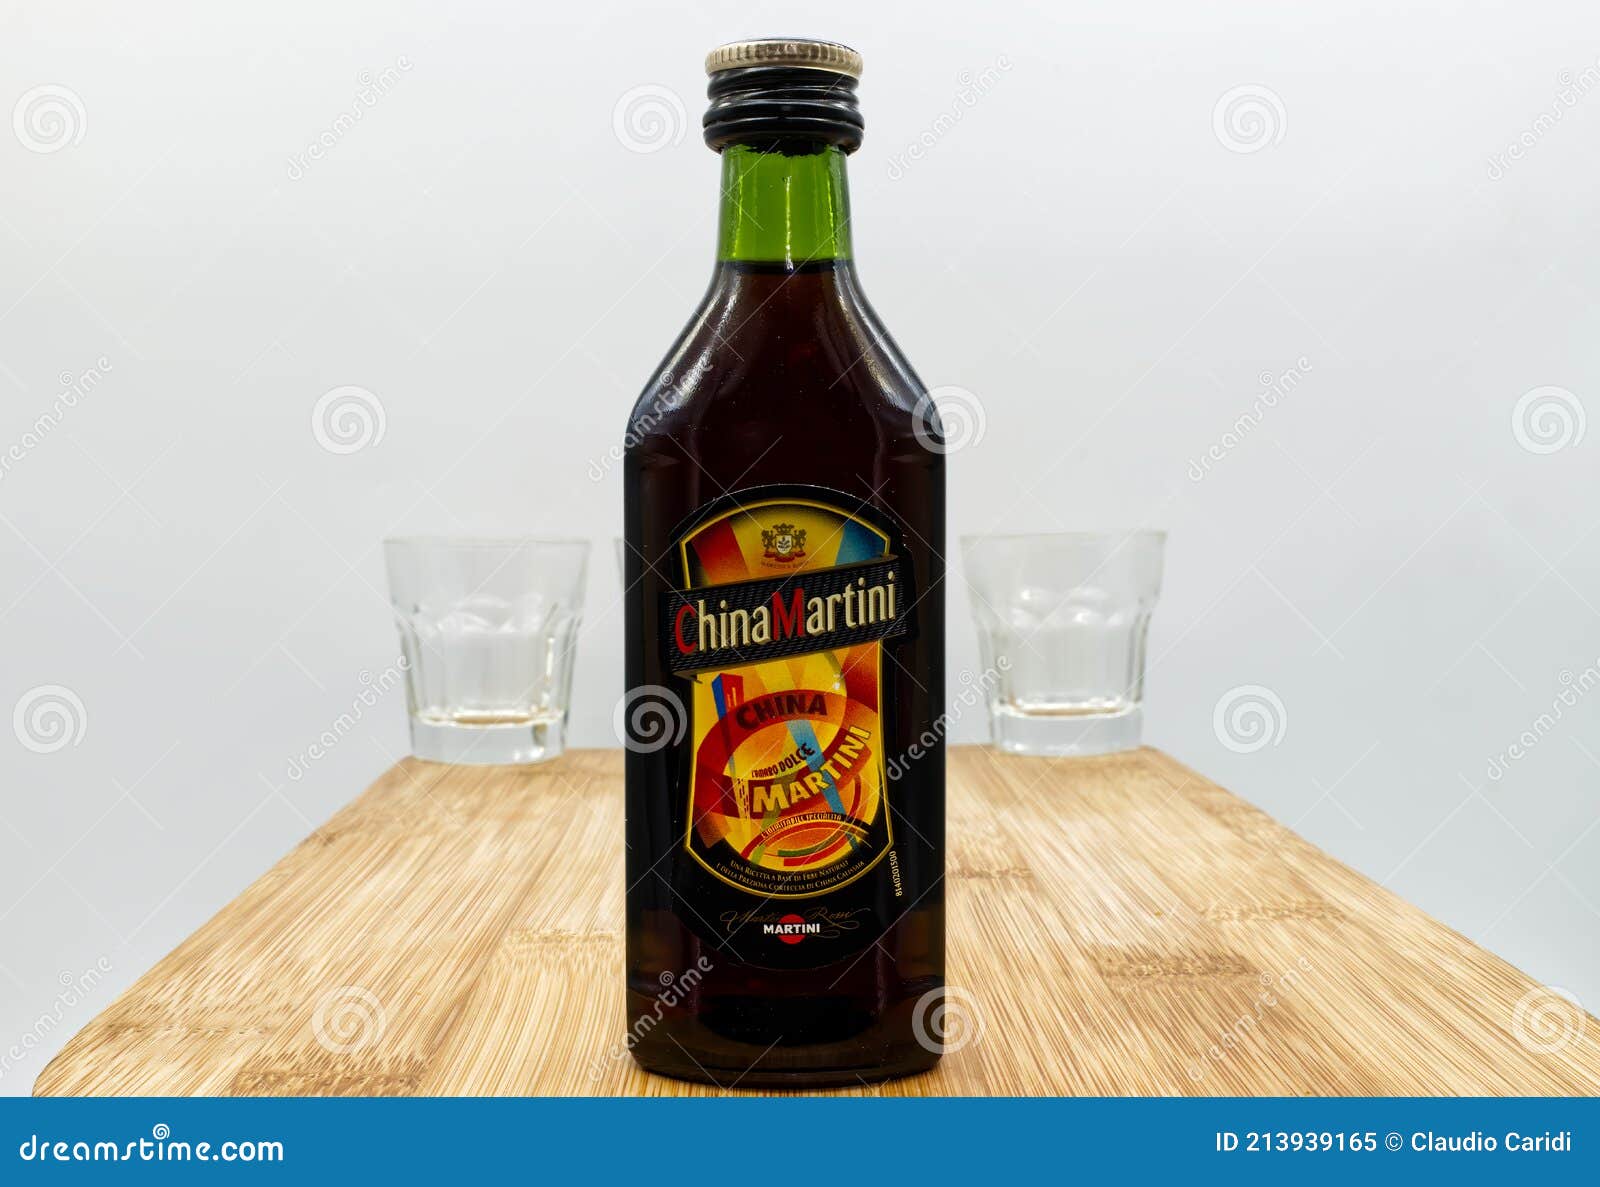 A Bottle of Italian China Martini, Bitter Sweet, on Wooden Table